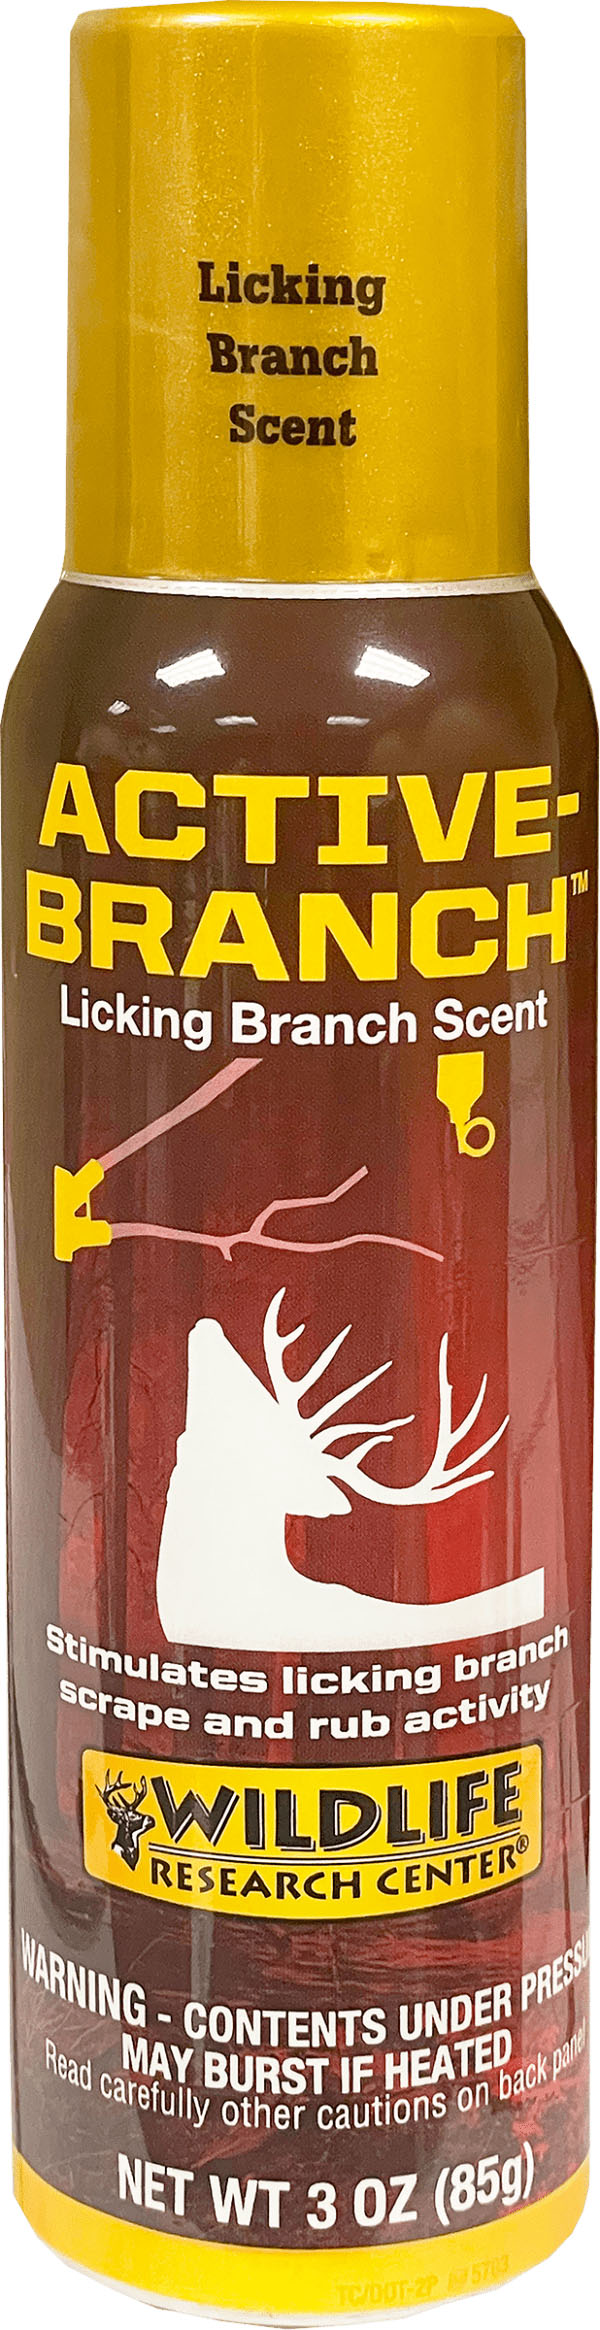 WR ACTIVE-BRANCH SPRAY CAN - Sale